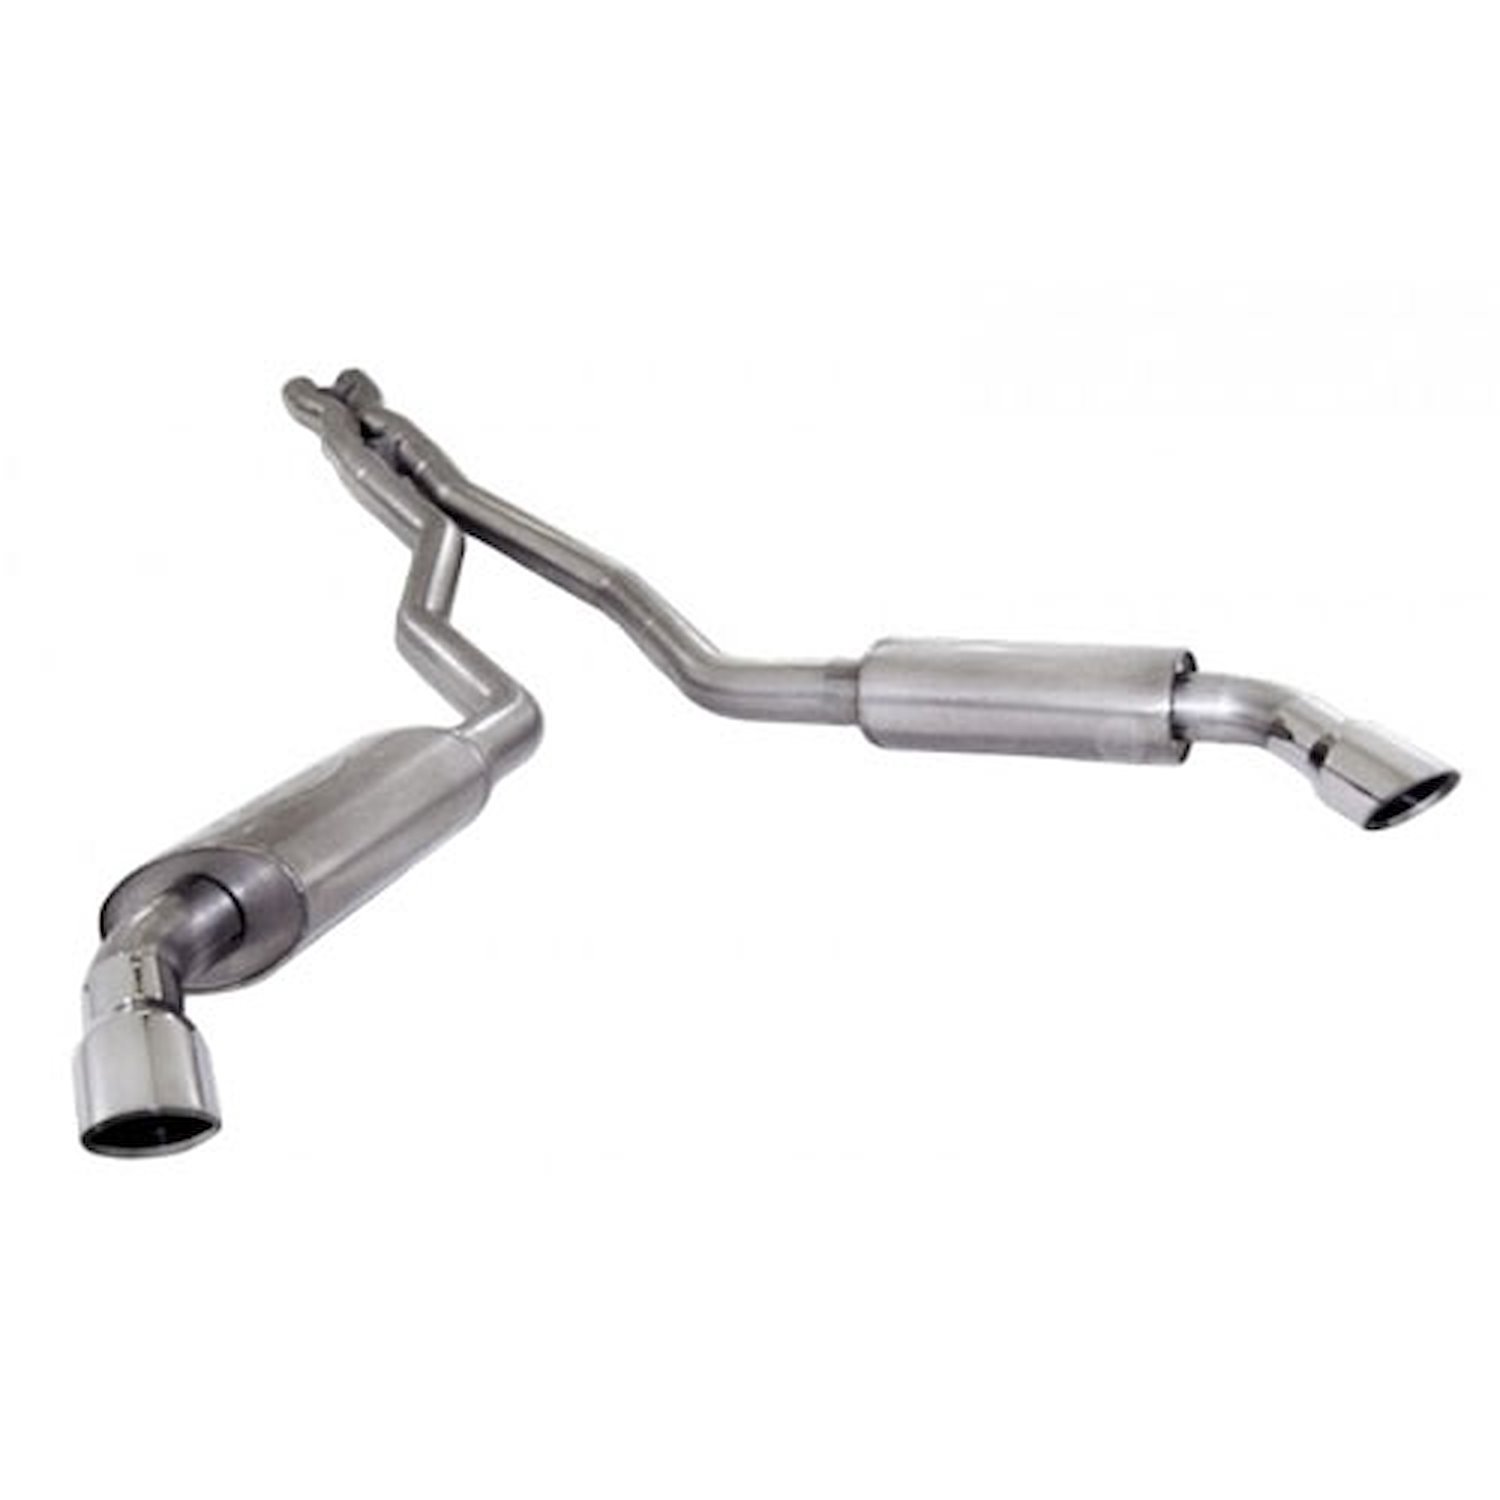 2010+ Camaro 6.2L 304 SS CNC mandrel bent 3 dual exhaust system with x-pipe dual 3 core s-tube turbo